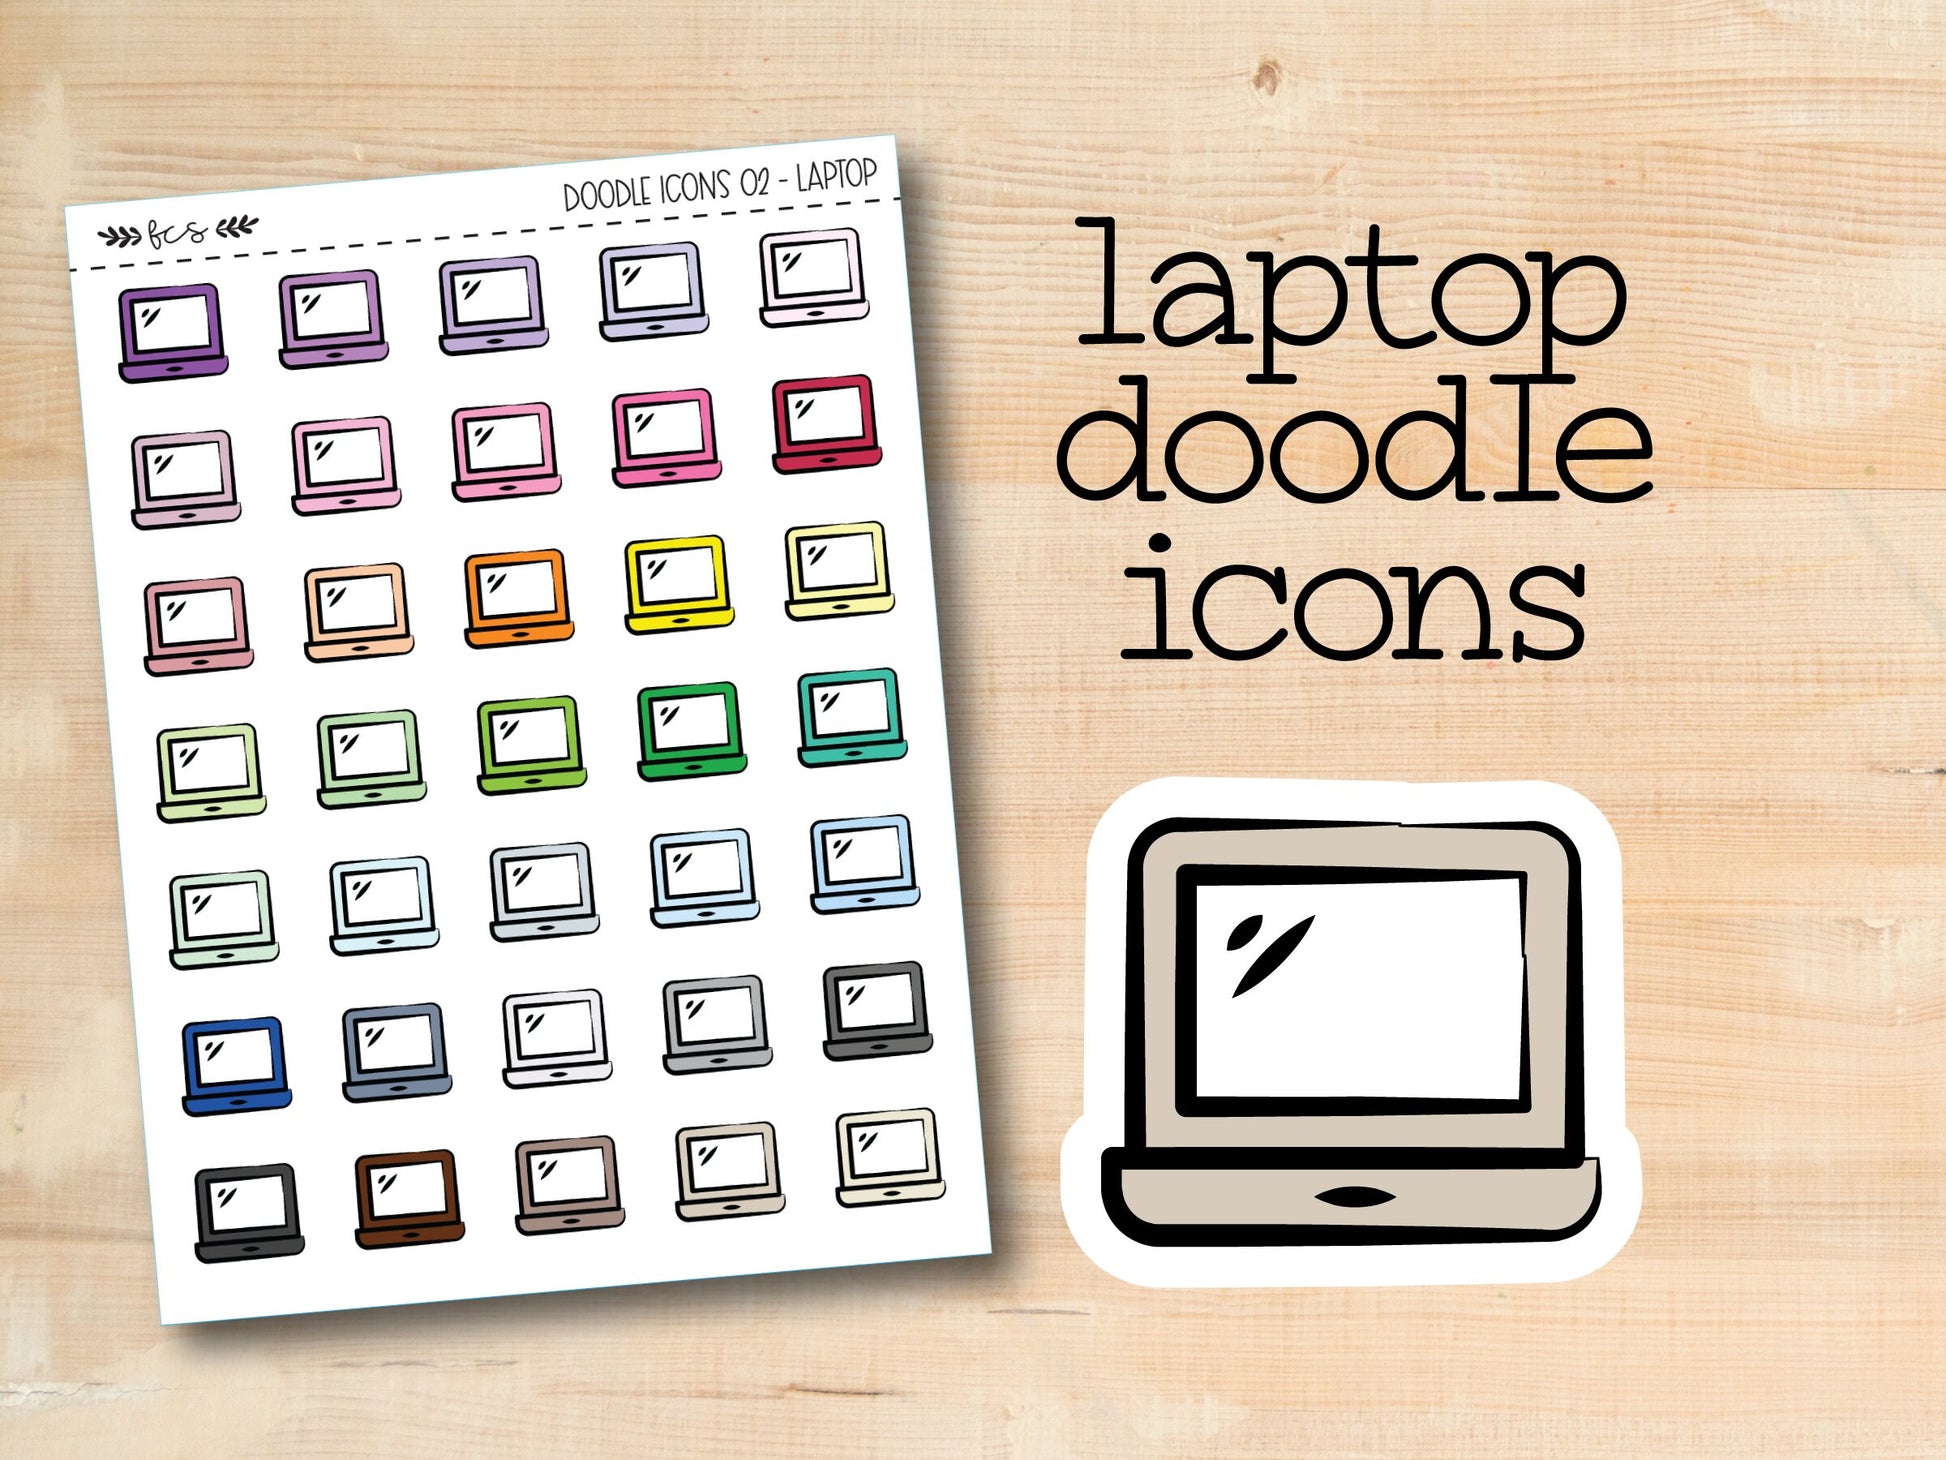 laptop doodle icons stickers on a wooden surface